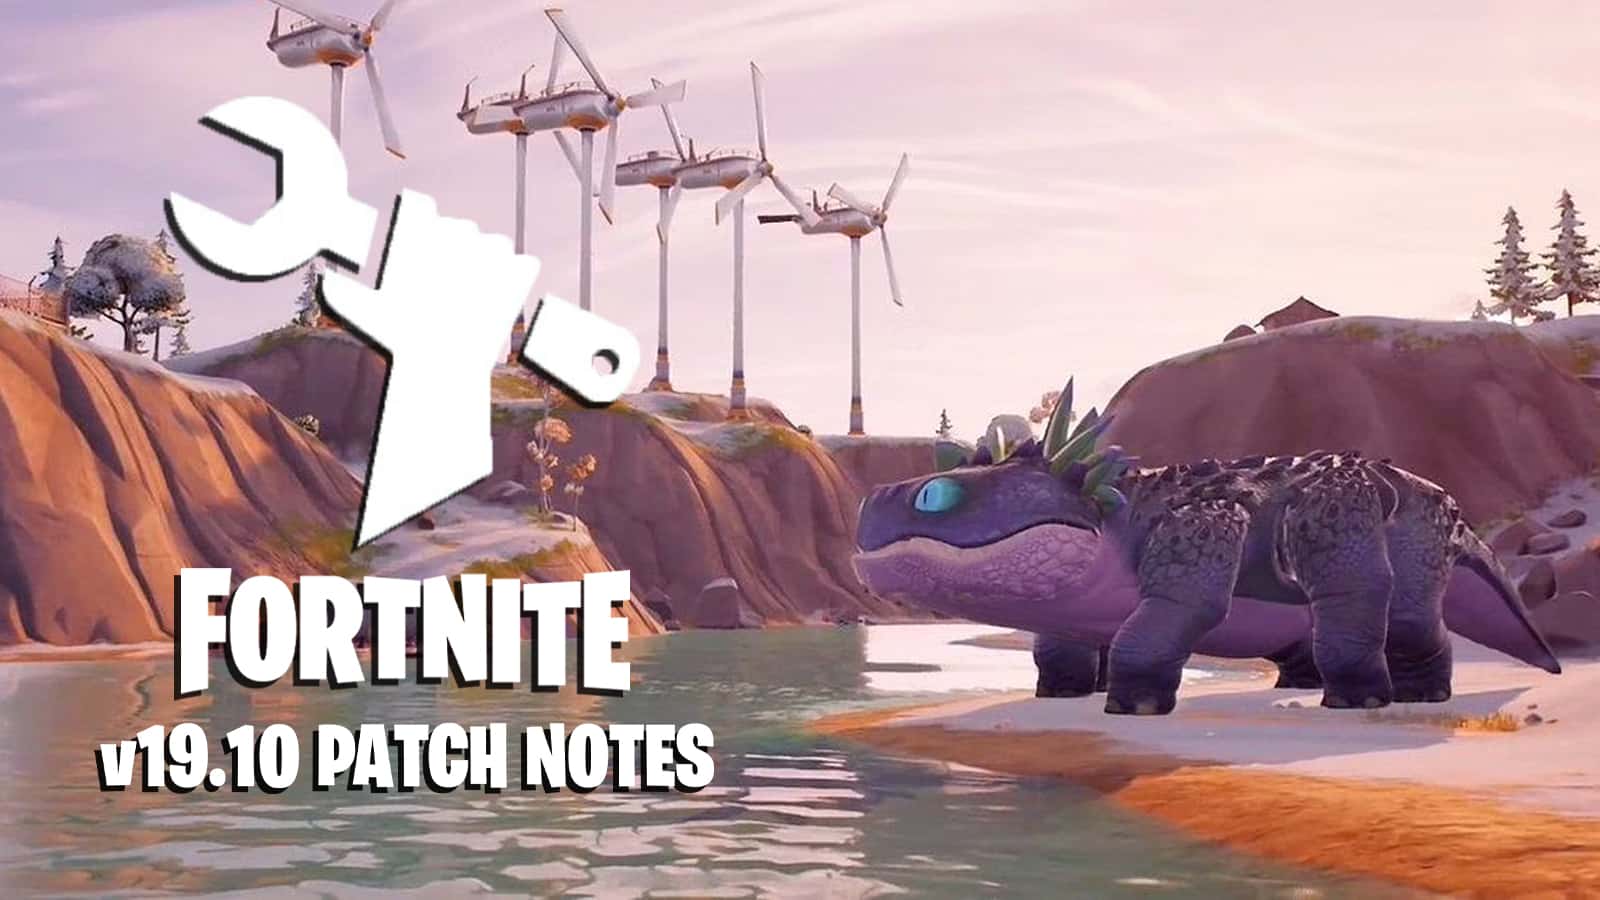 A screenshot of the new dinosaur arriving in Fortnite update 19.10 patch notes